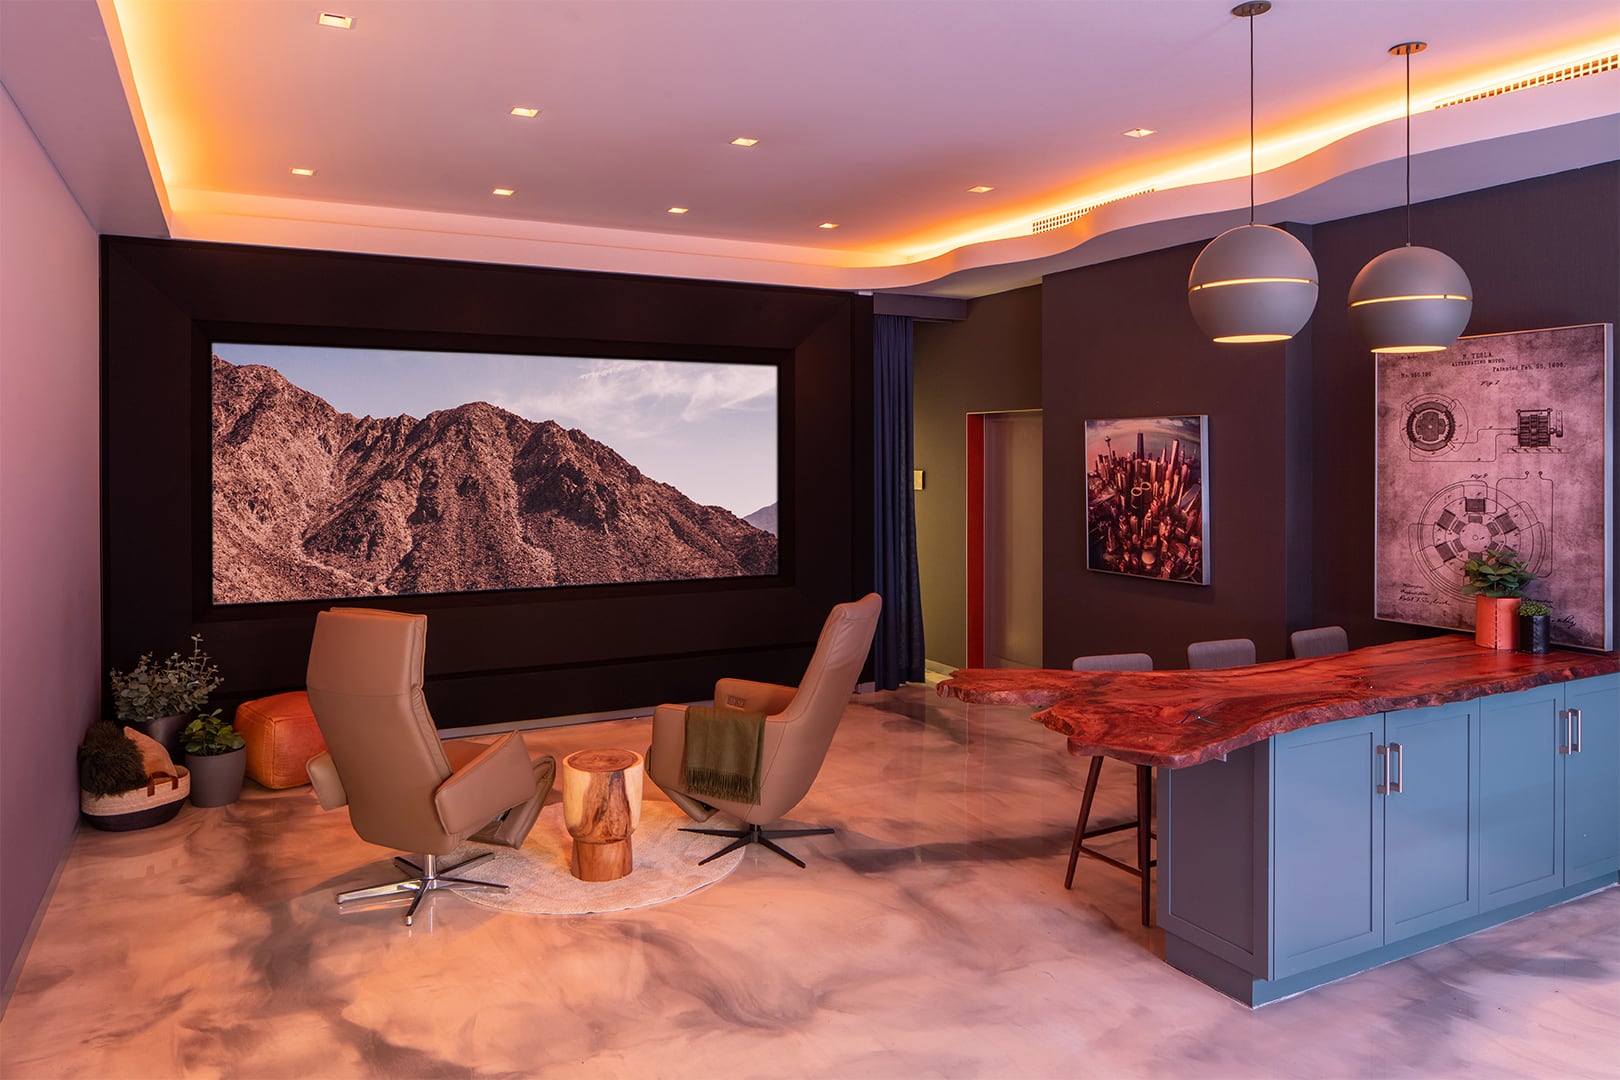 In a warm orange-lit setting, the Global Wave Showroom presents a captivating mountain view on its theater screen, while luxurious chairs face the display, and a meticulously crafted wooden island takes center stage.